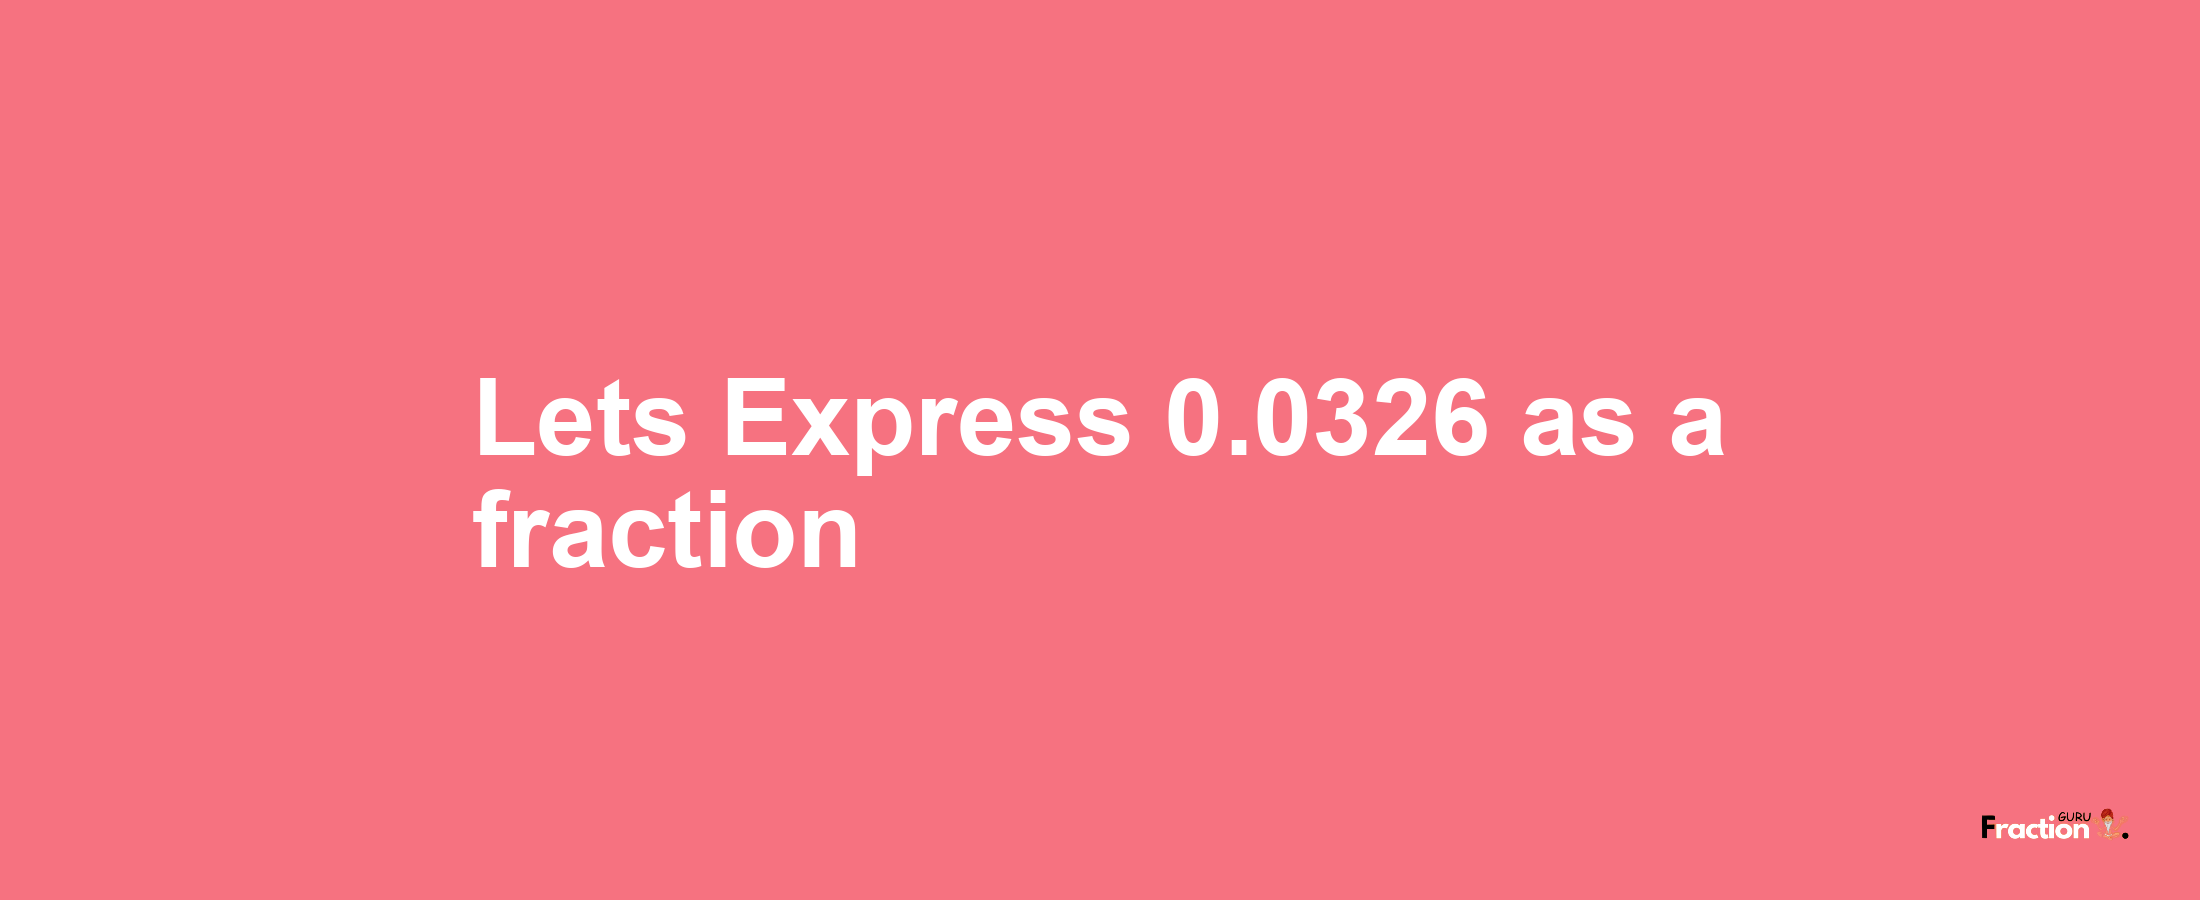 Lets Express 0.0326 as afraction